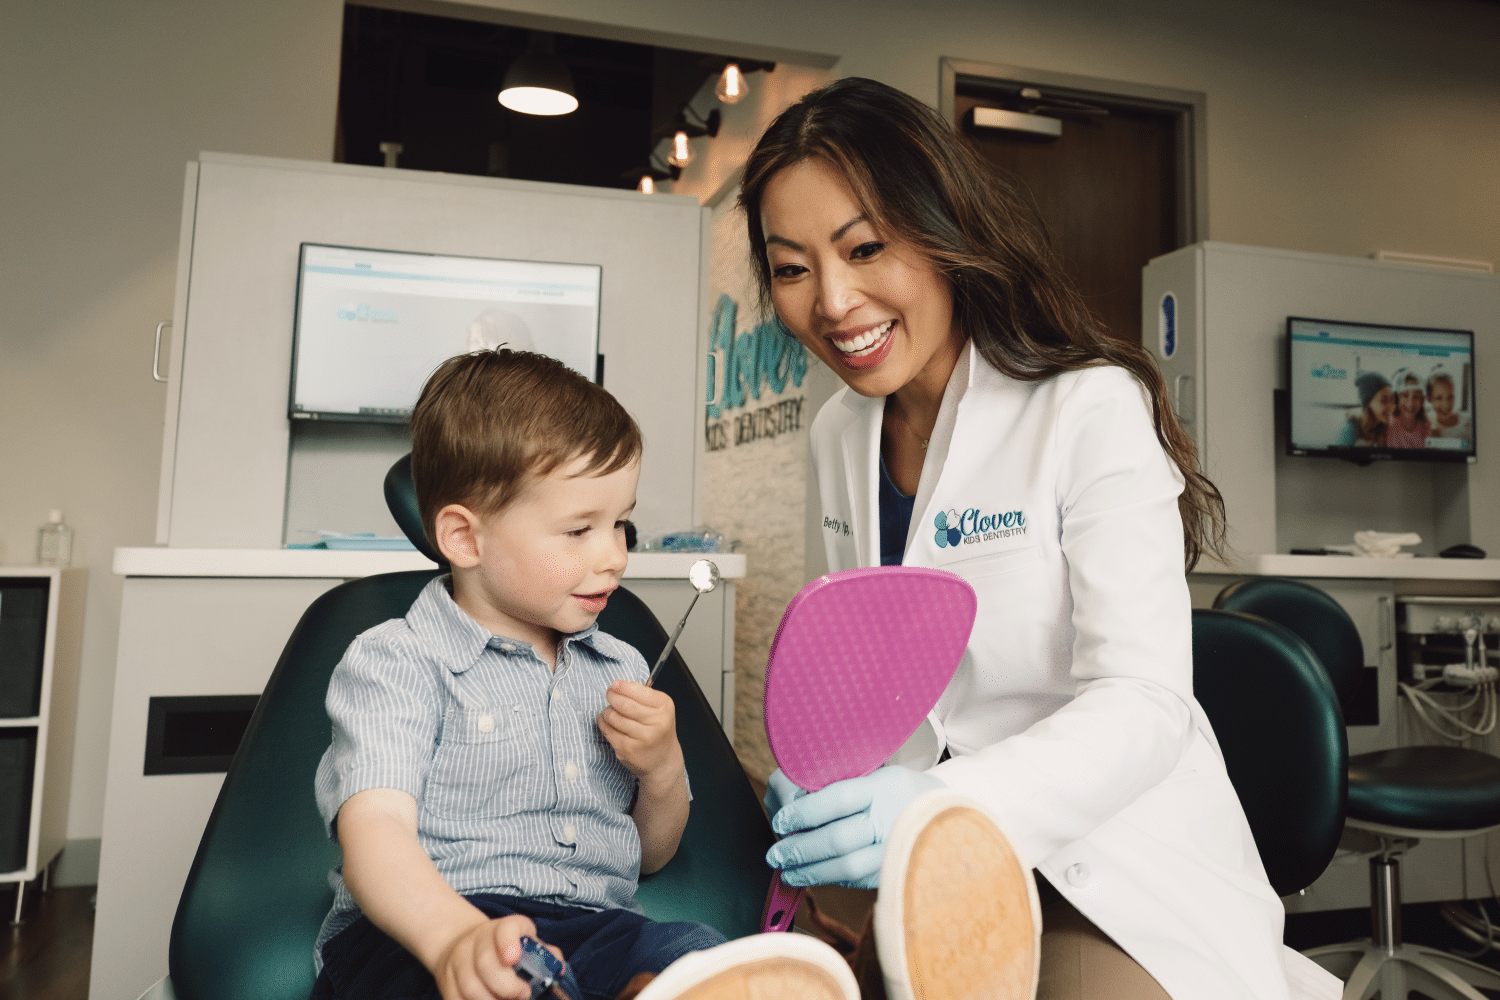 Top Pediatric Dentist Betty Yip with Happy Child Dental Patient